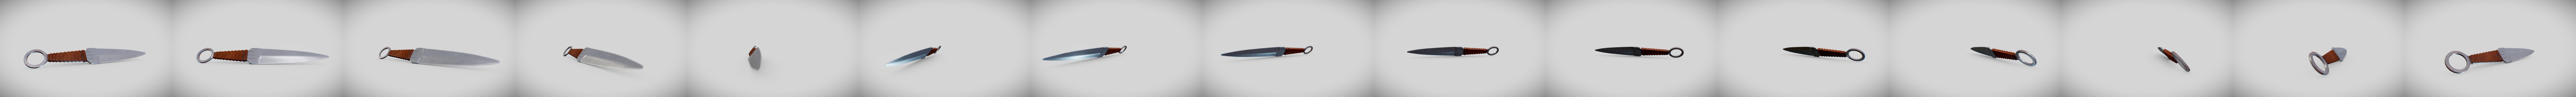 Throwing Knife Download Free 3d Model By Michele Passerino Michele Passerino 30e088c Sketchfab - how to throw knives in roblox mobile